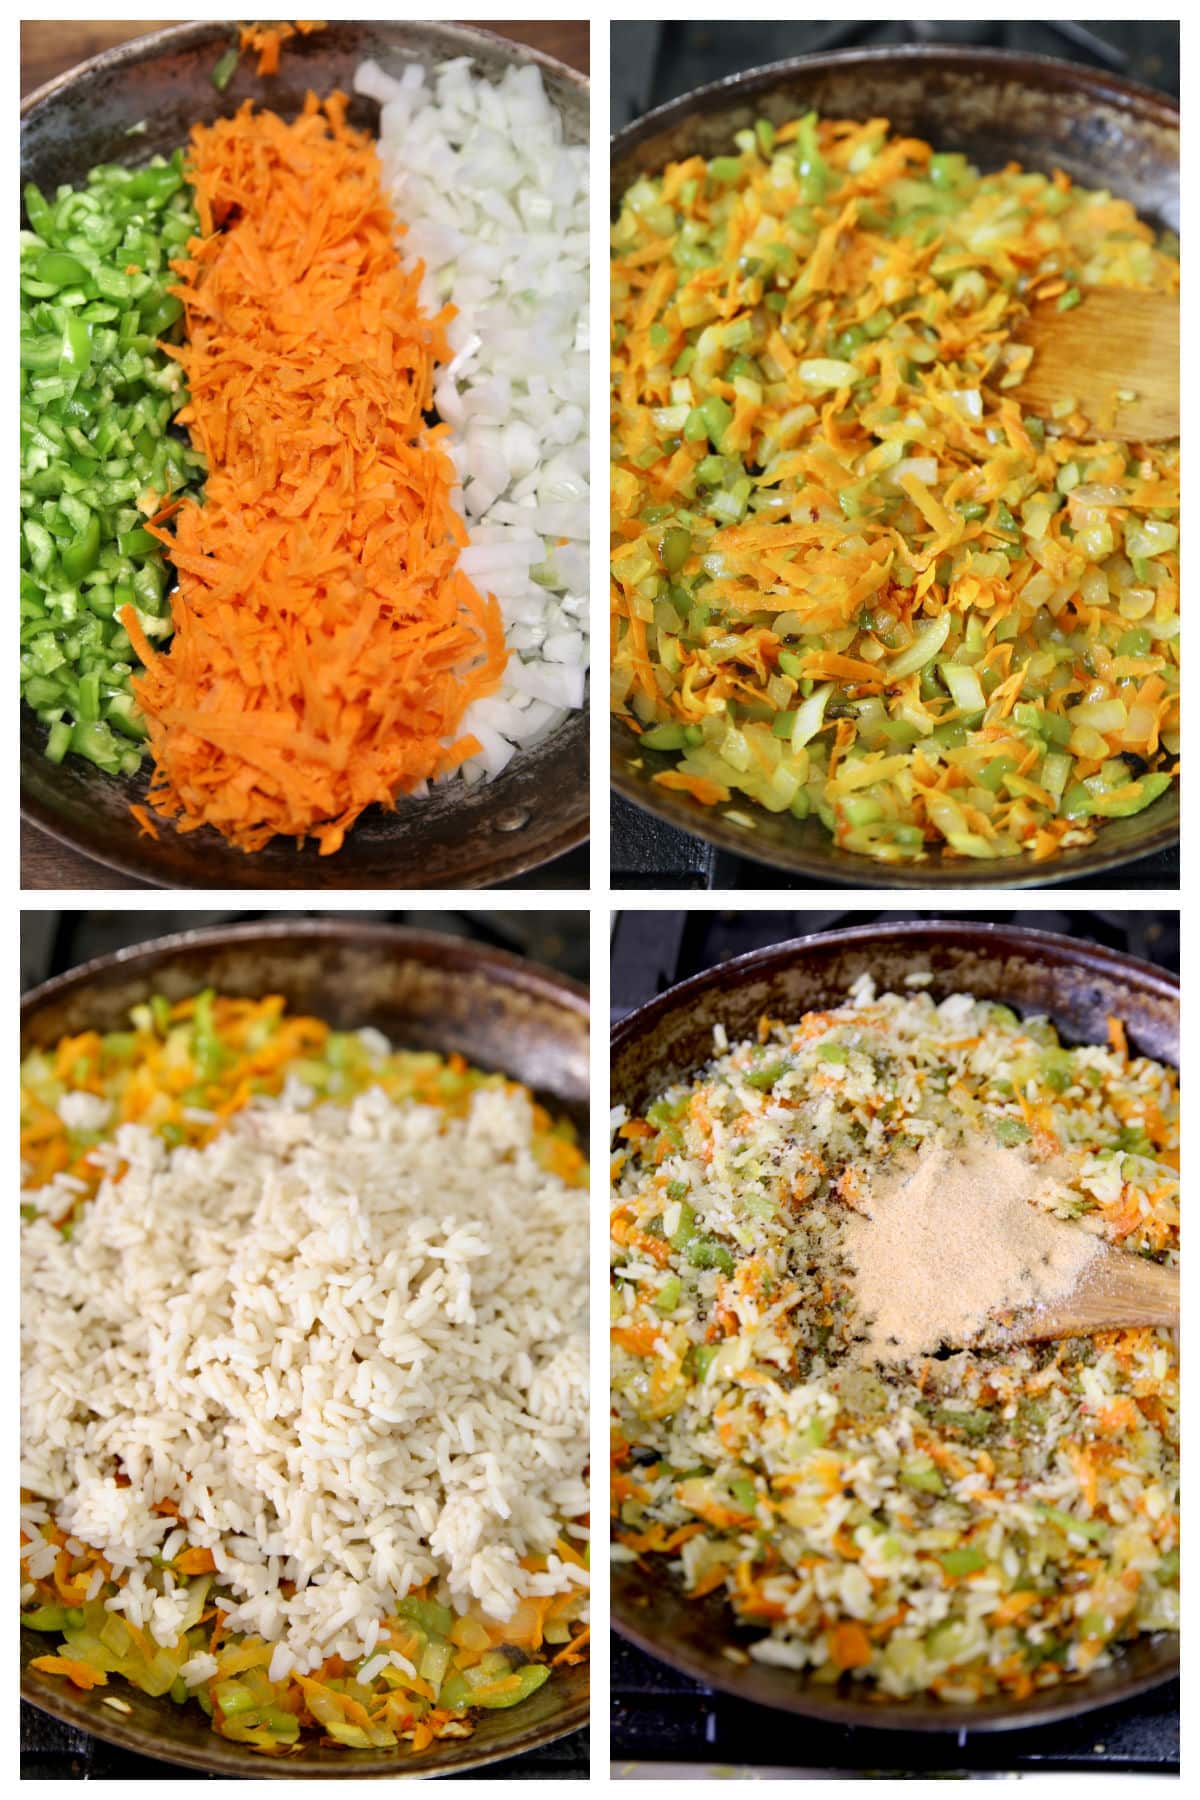 Cooking vegetables and rice for rice pilaf filling for casserole.